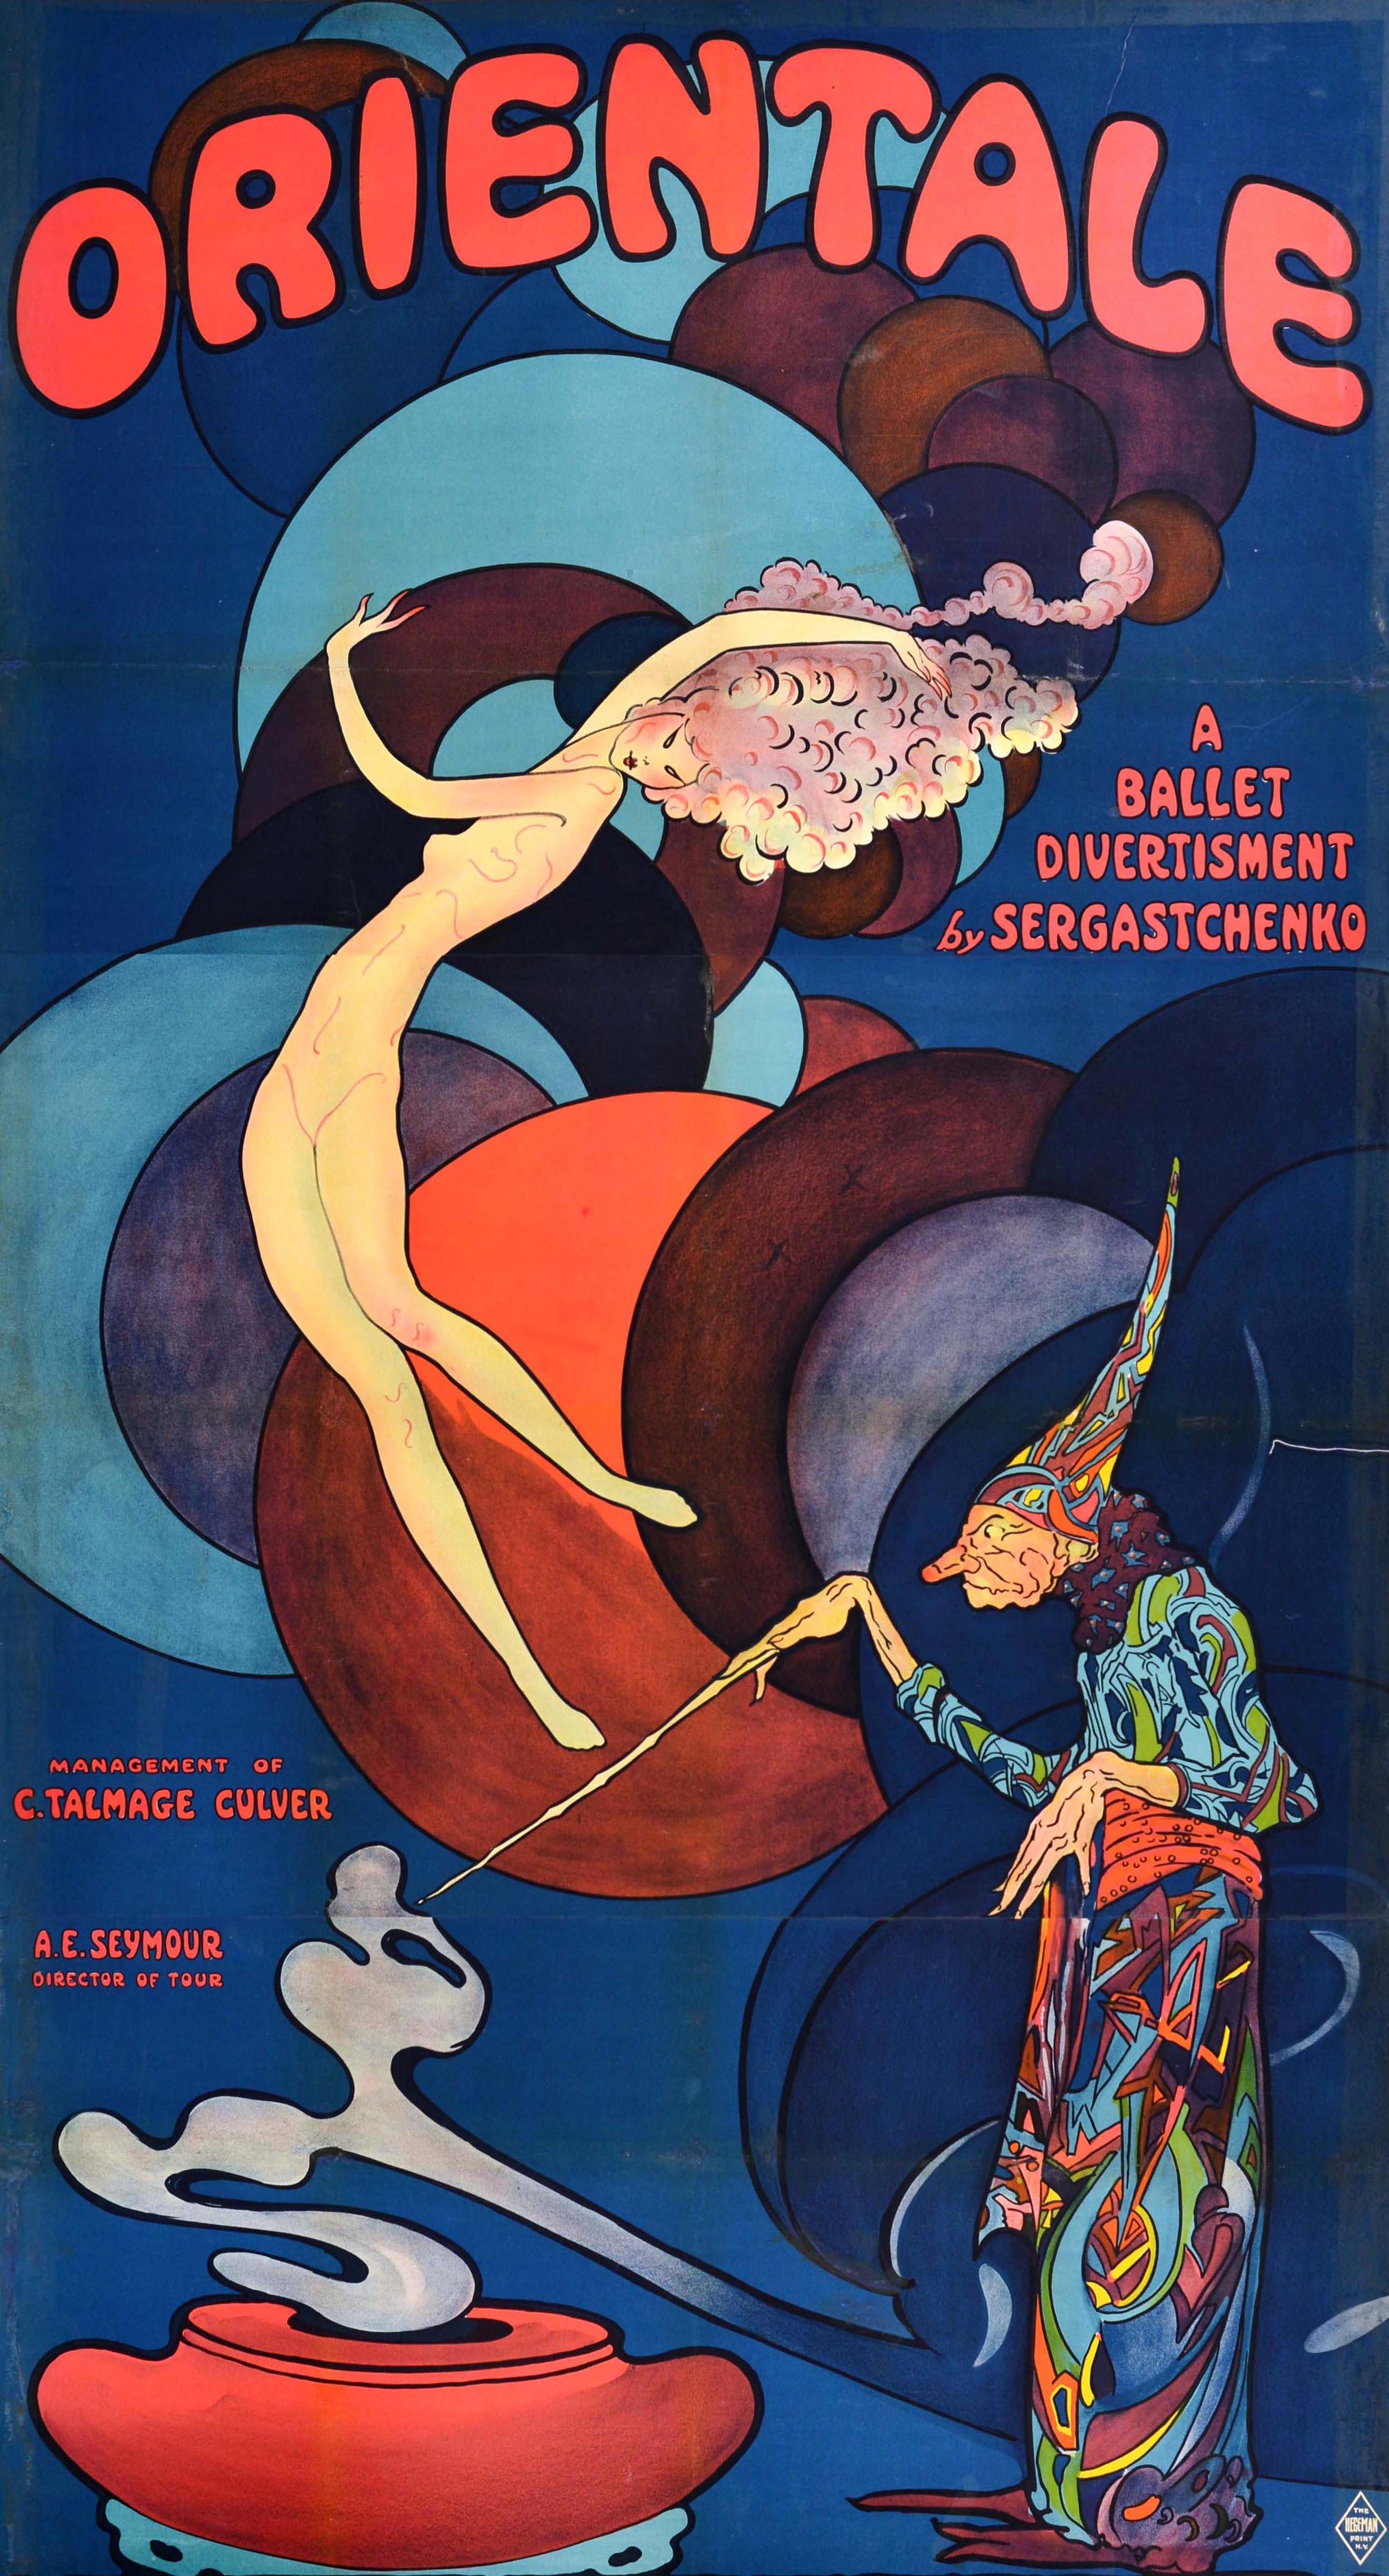 Original antique advertising poster - Orientale A Ballet Divertissement by Sergastchenko management of C. Talmage Culver A.E. Seymour director of tour - featuring a great illustration depicting a dancing lady with a mass of curling hair and a witch